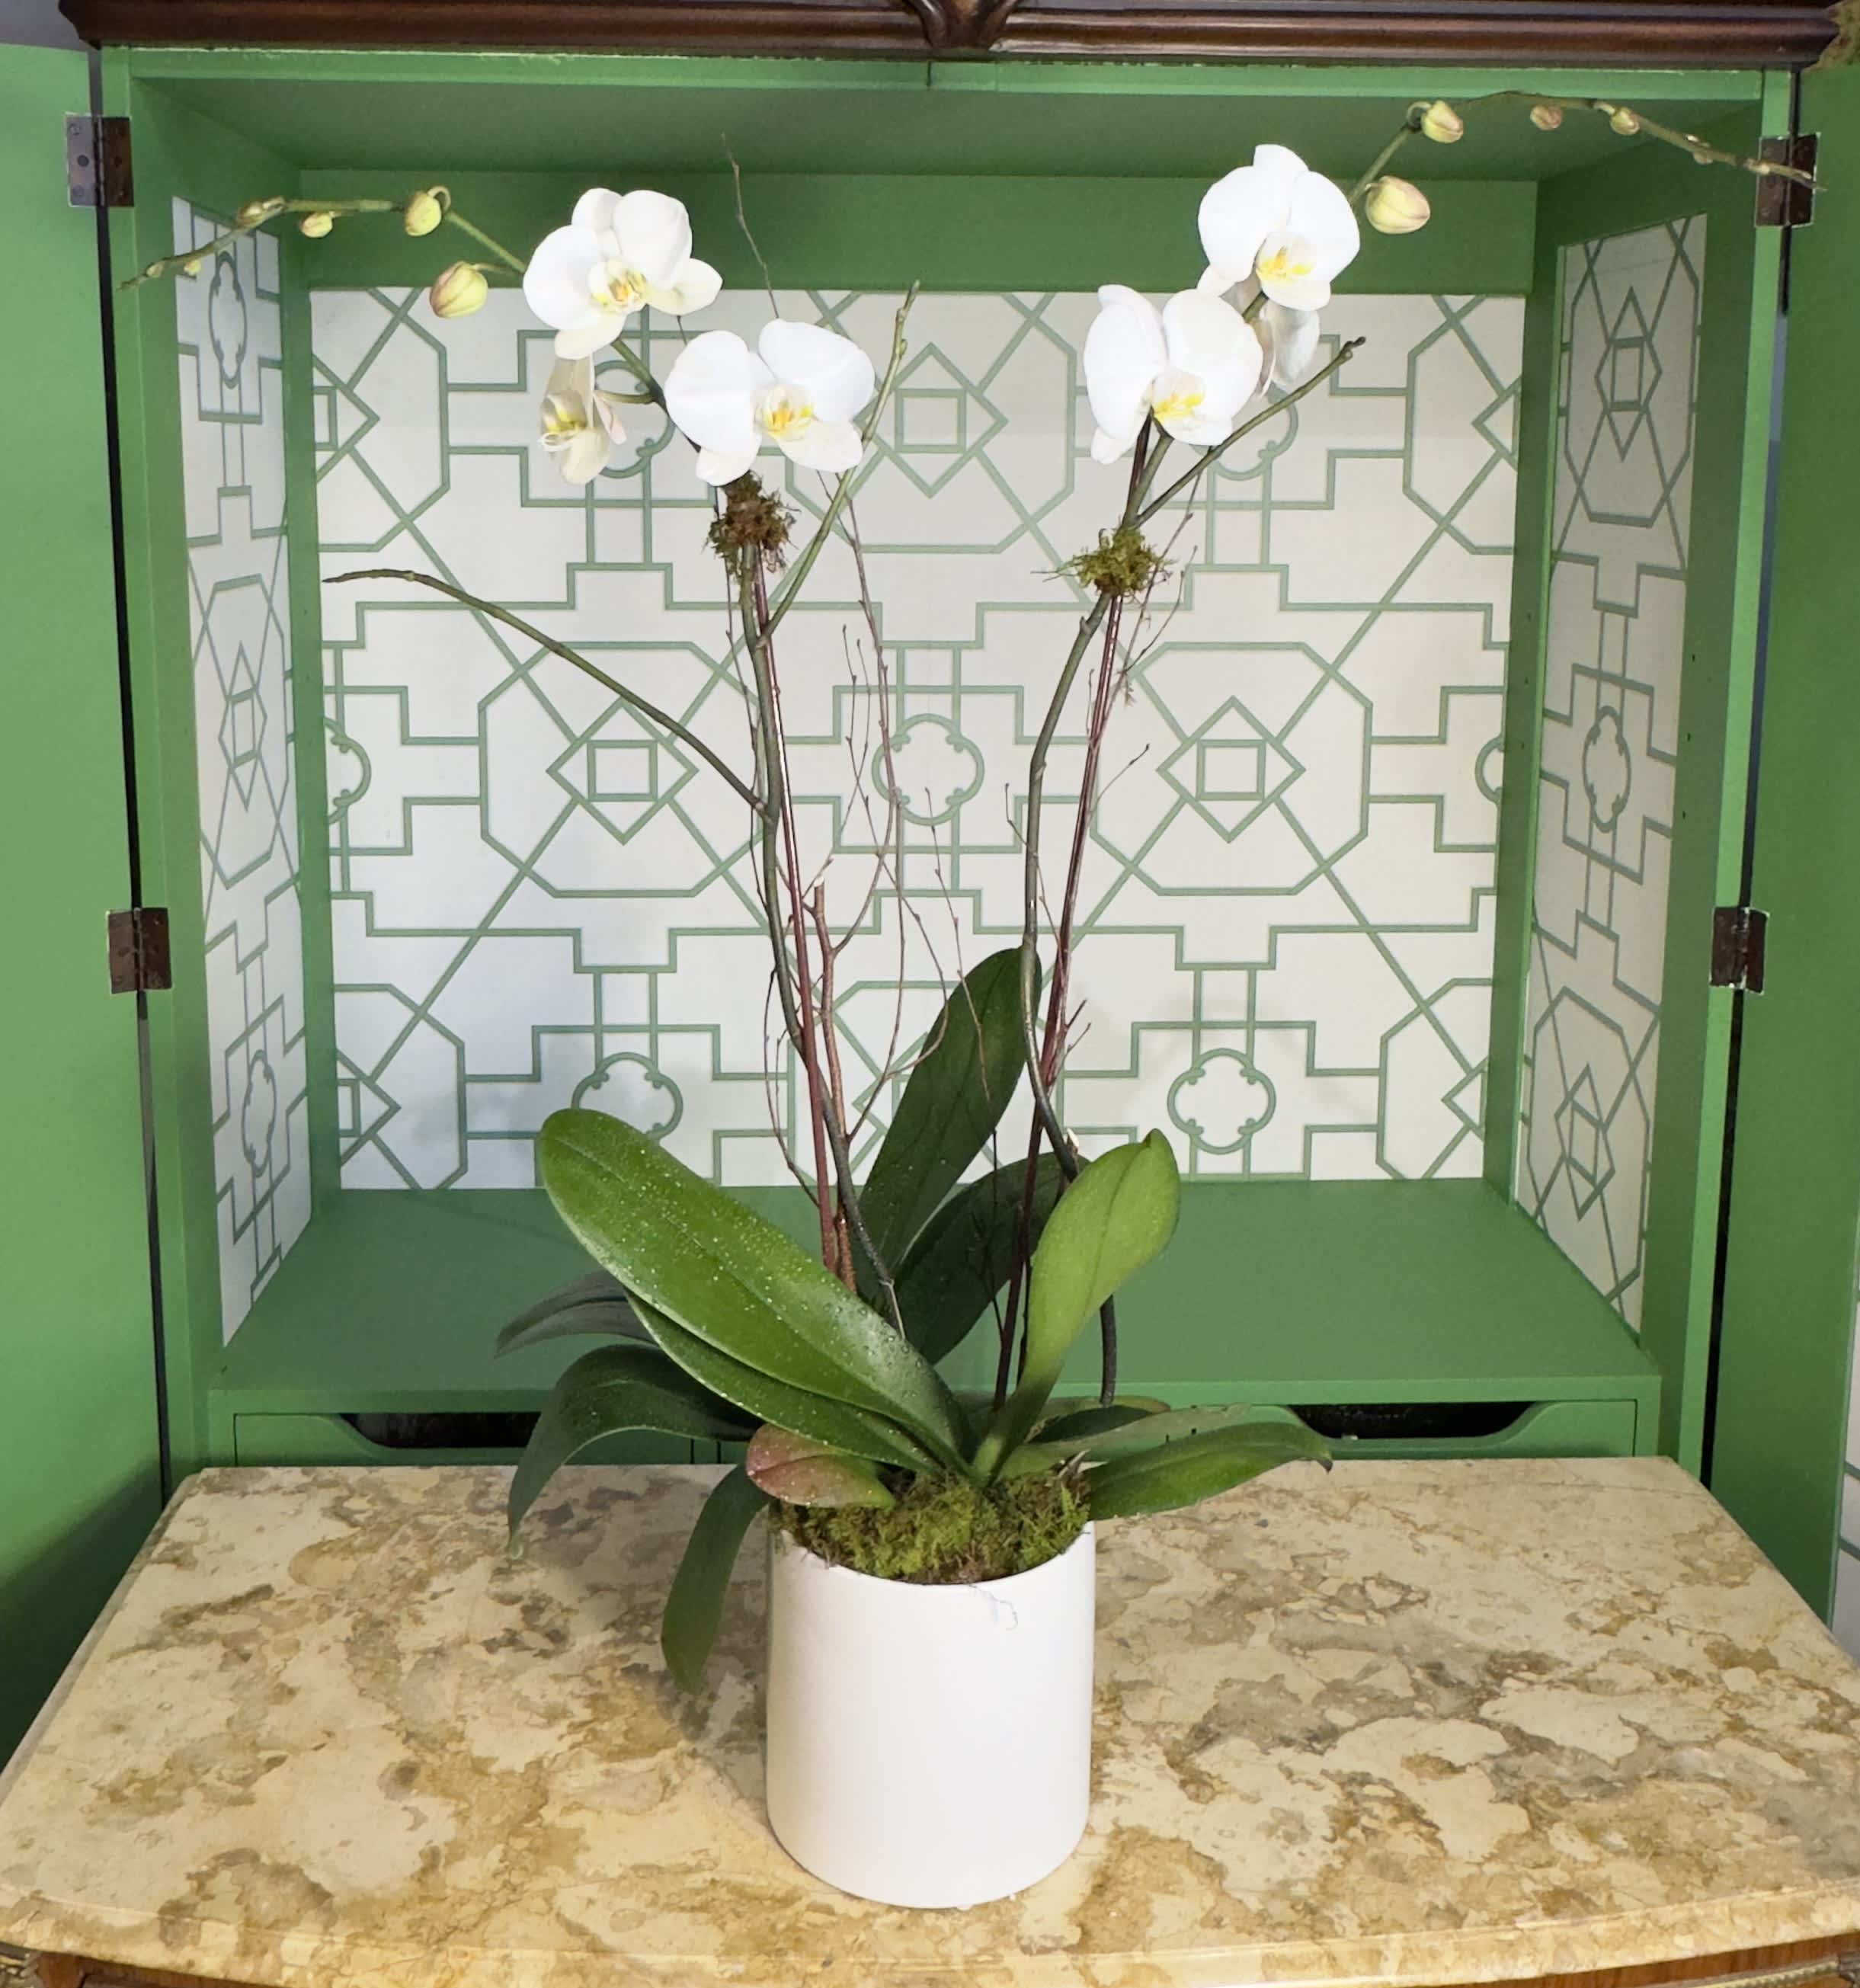 Double White Phalaenopsis Orchids - An elegant ceramic cube filled with 2 beautiful white Phalaenopsis orchids.  *POT MAY VARY DEPENDING ON AVAILABILITY*